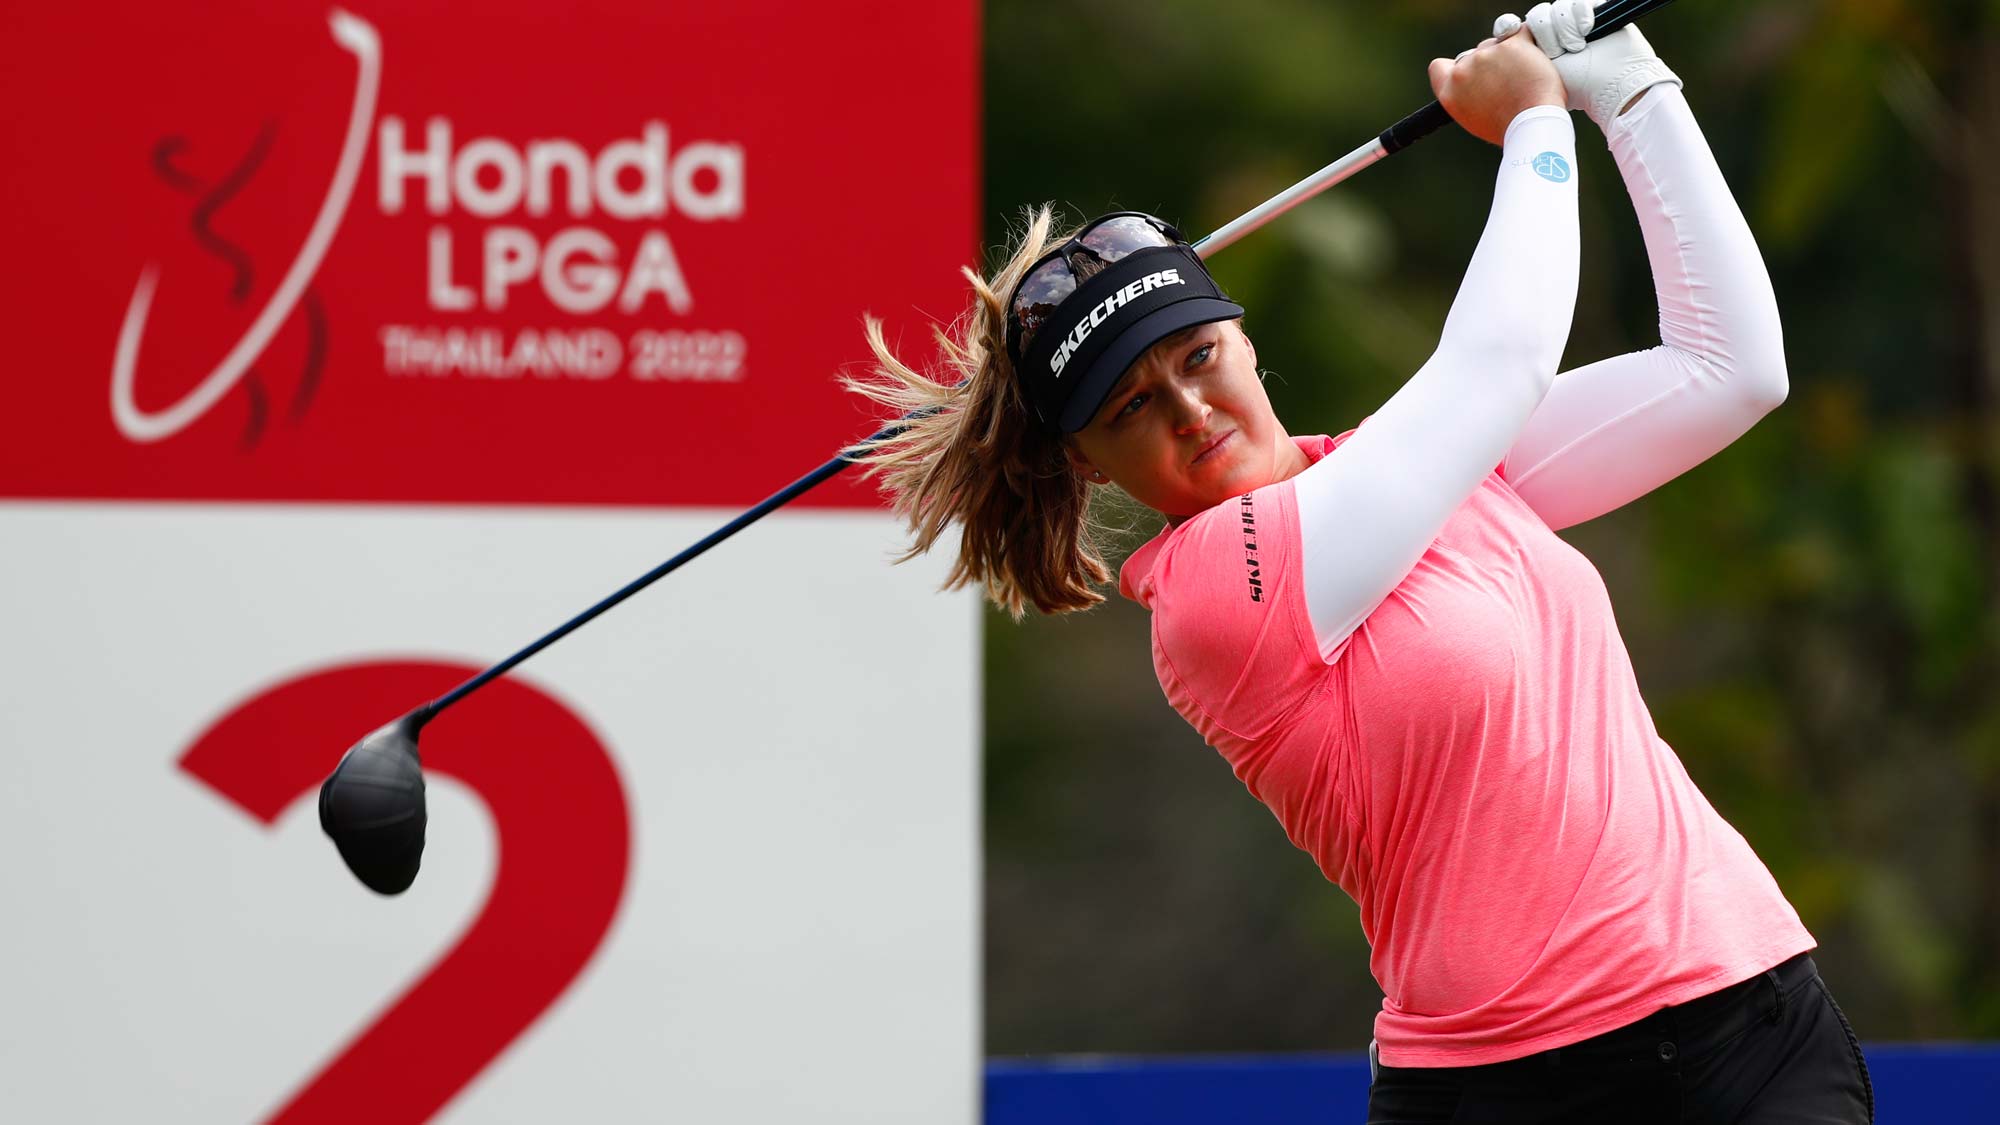 Brooke M. Henderson of Canada tees off on the 2nd hole during the first round of Honda LPGA Thailand